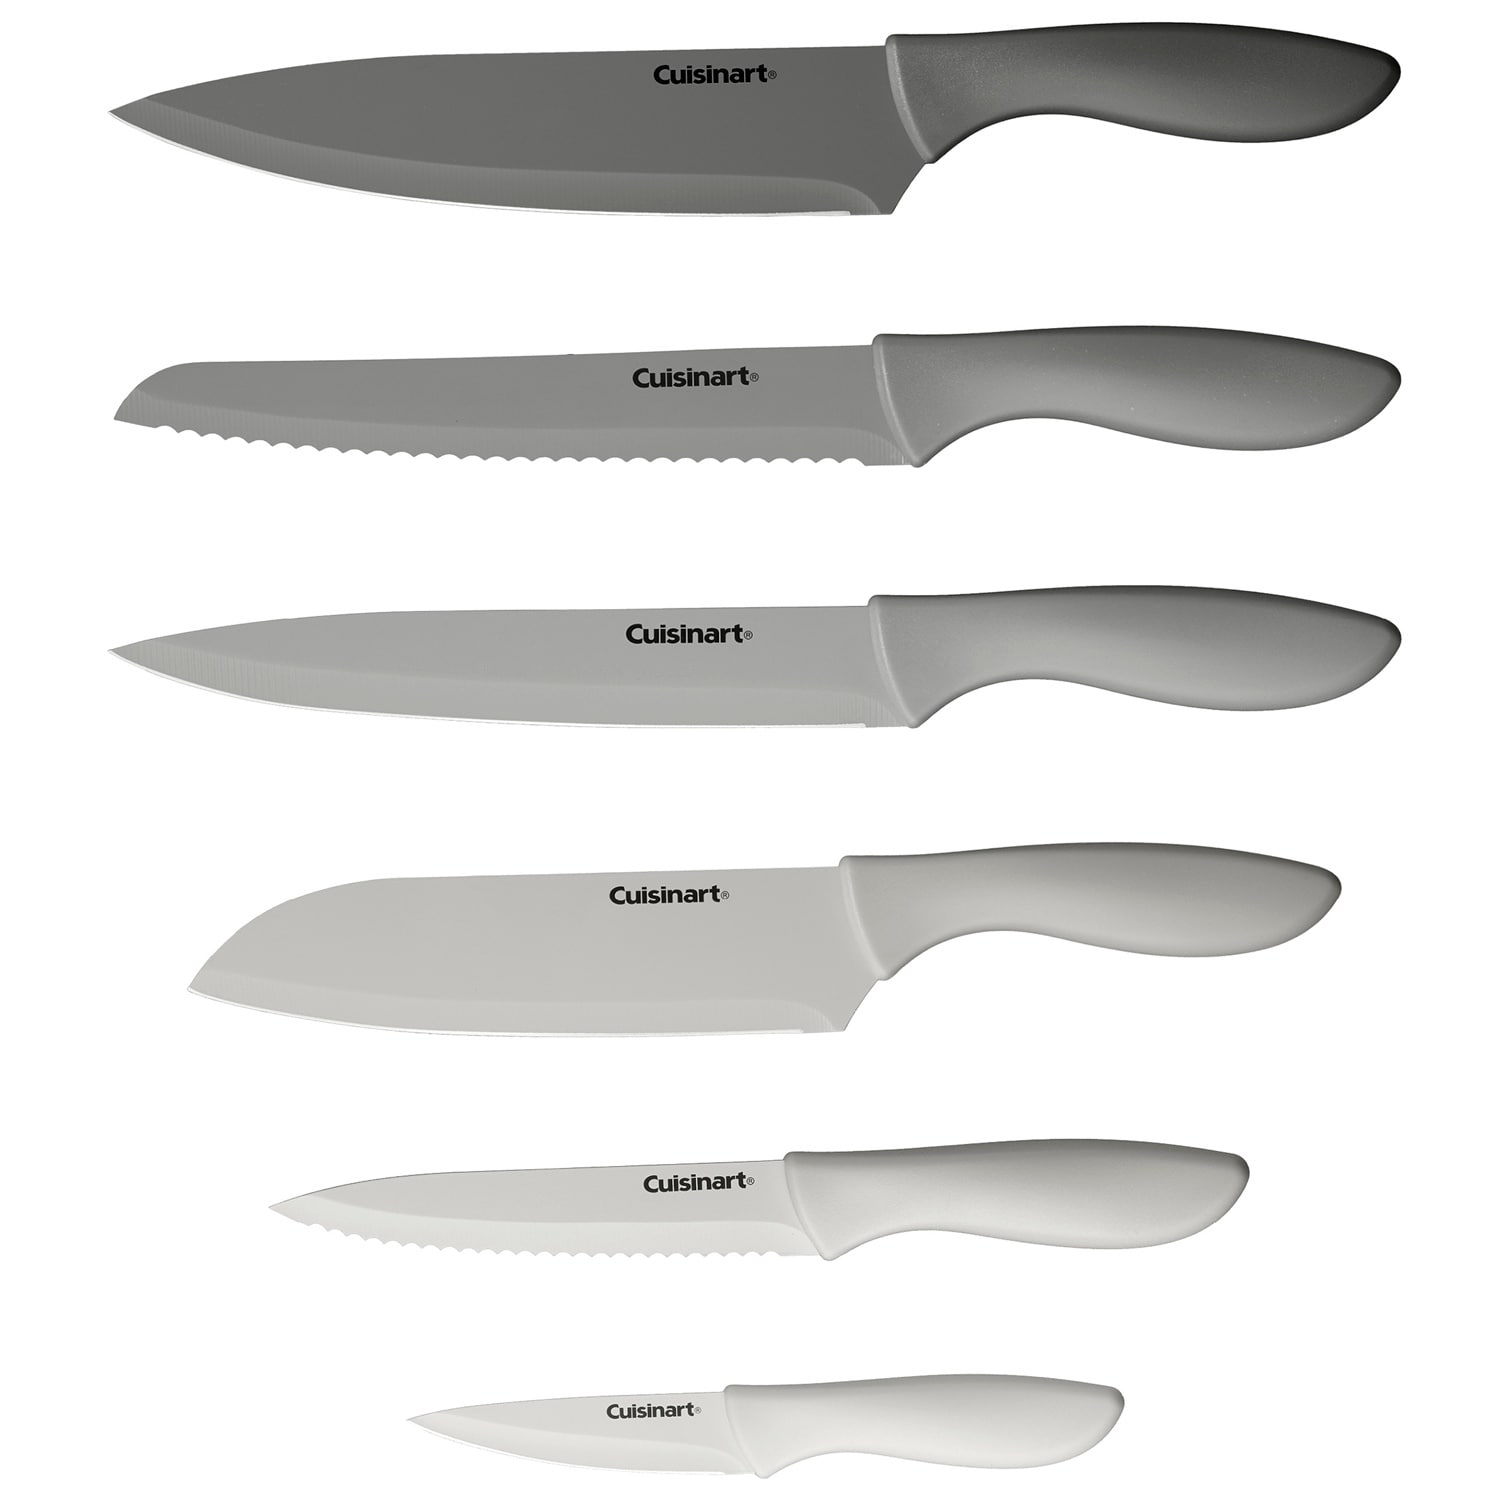 https://ak1.ostkcdn.com/images/products/is/images/direct/37ad24a3073a41f3348f90219daade1eab3522f2/Cuisinart-Advantage-12-Piece-Gray-Knife-Set-and-Blade-Guards-C55-12PCG.jpg